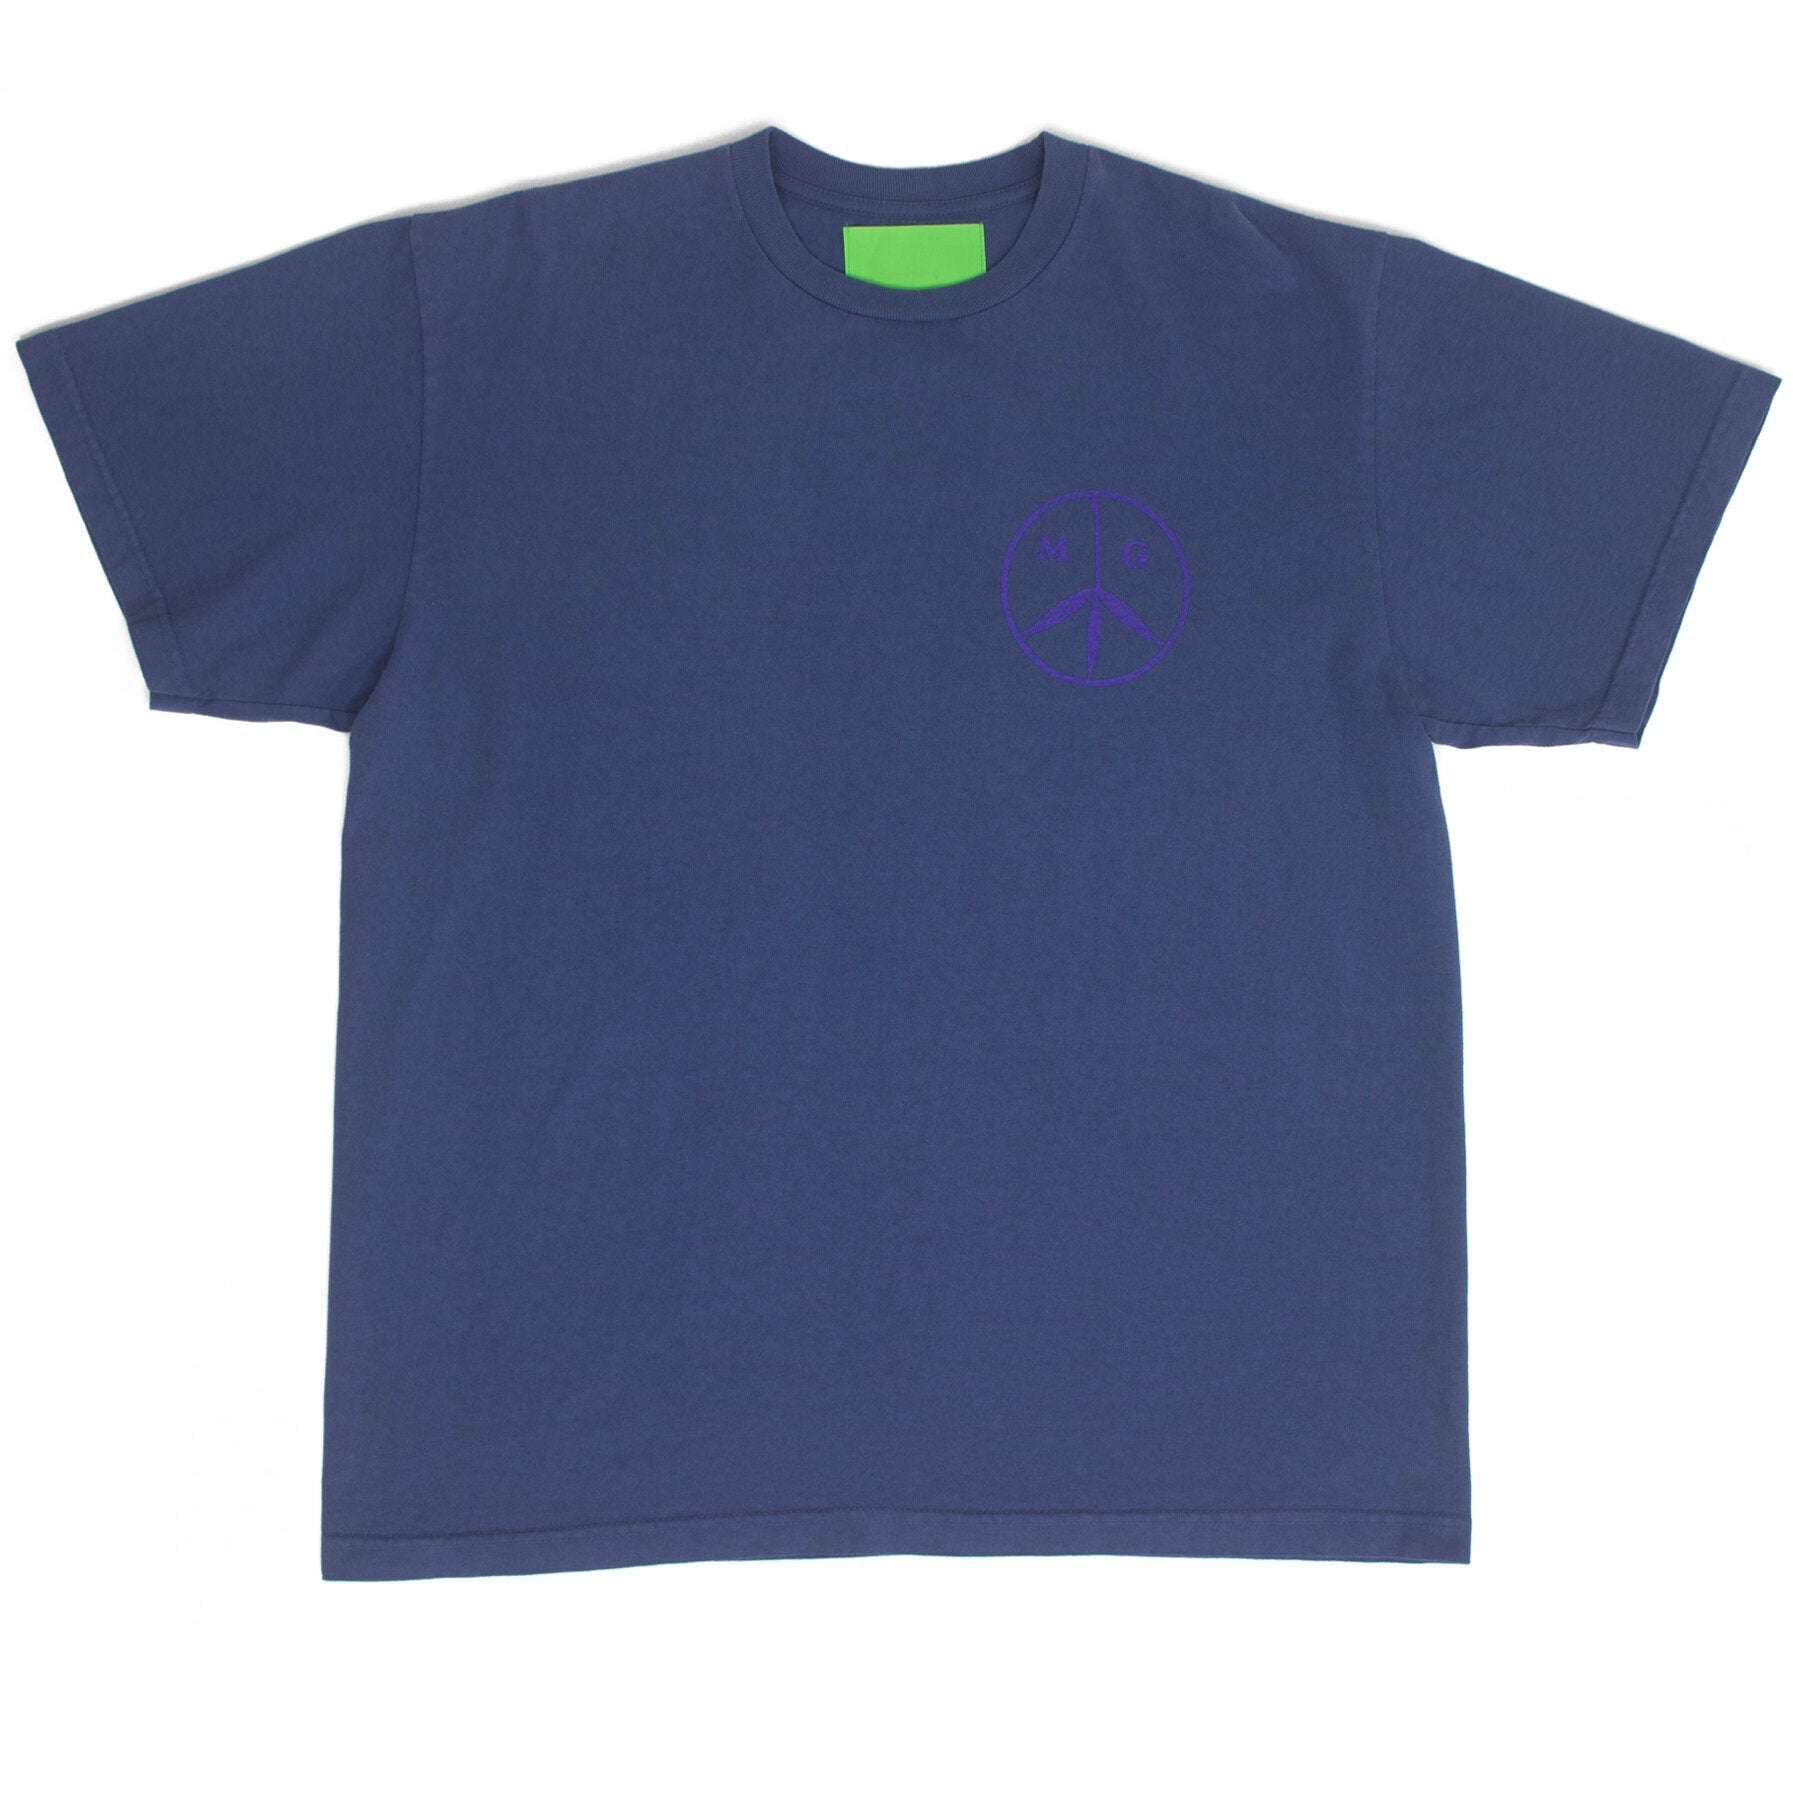 Aquarian Airlines Tee - Warm Blue-Mister Green-Mister Green